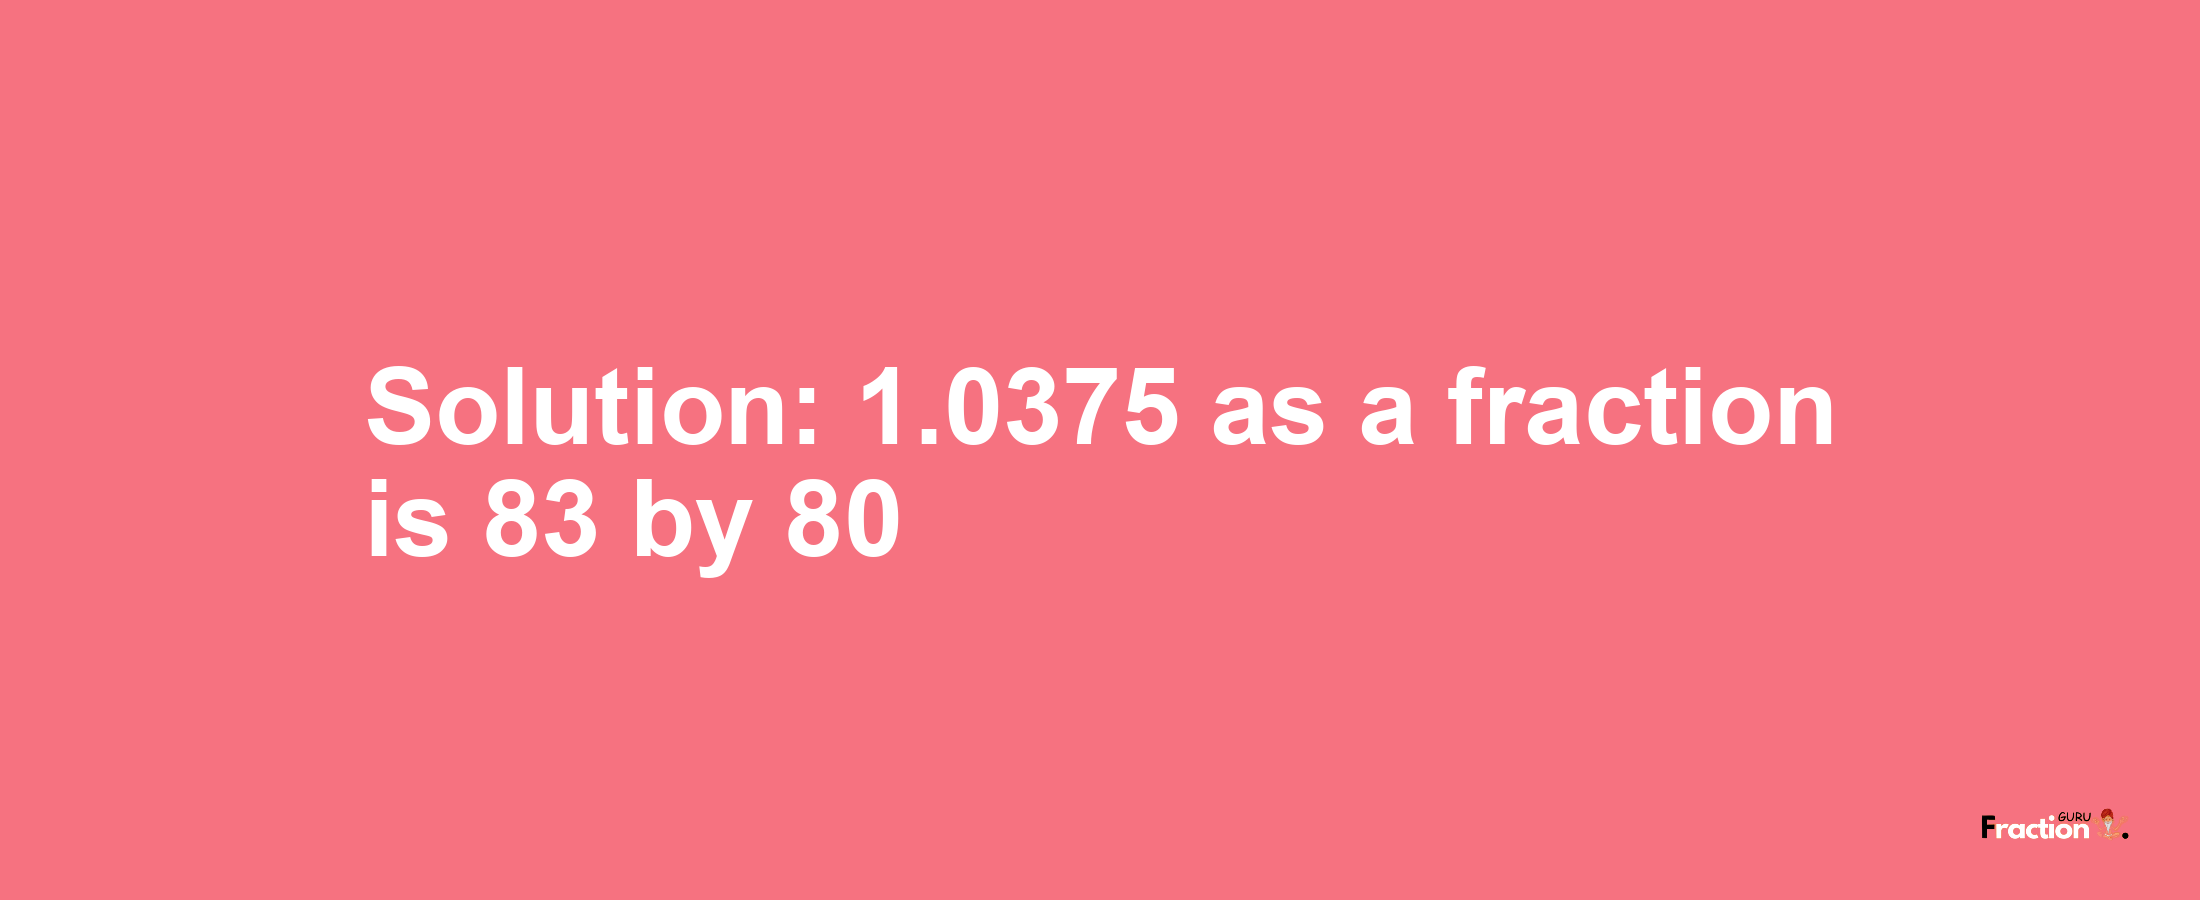 Solution:1.0375 as a fraction is 83/80